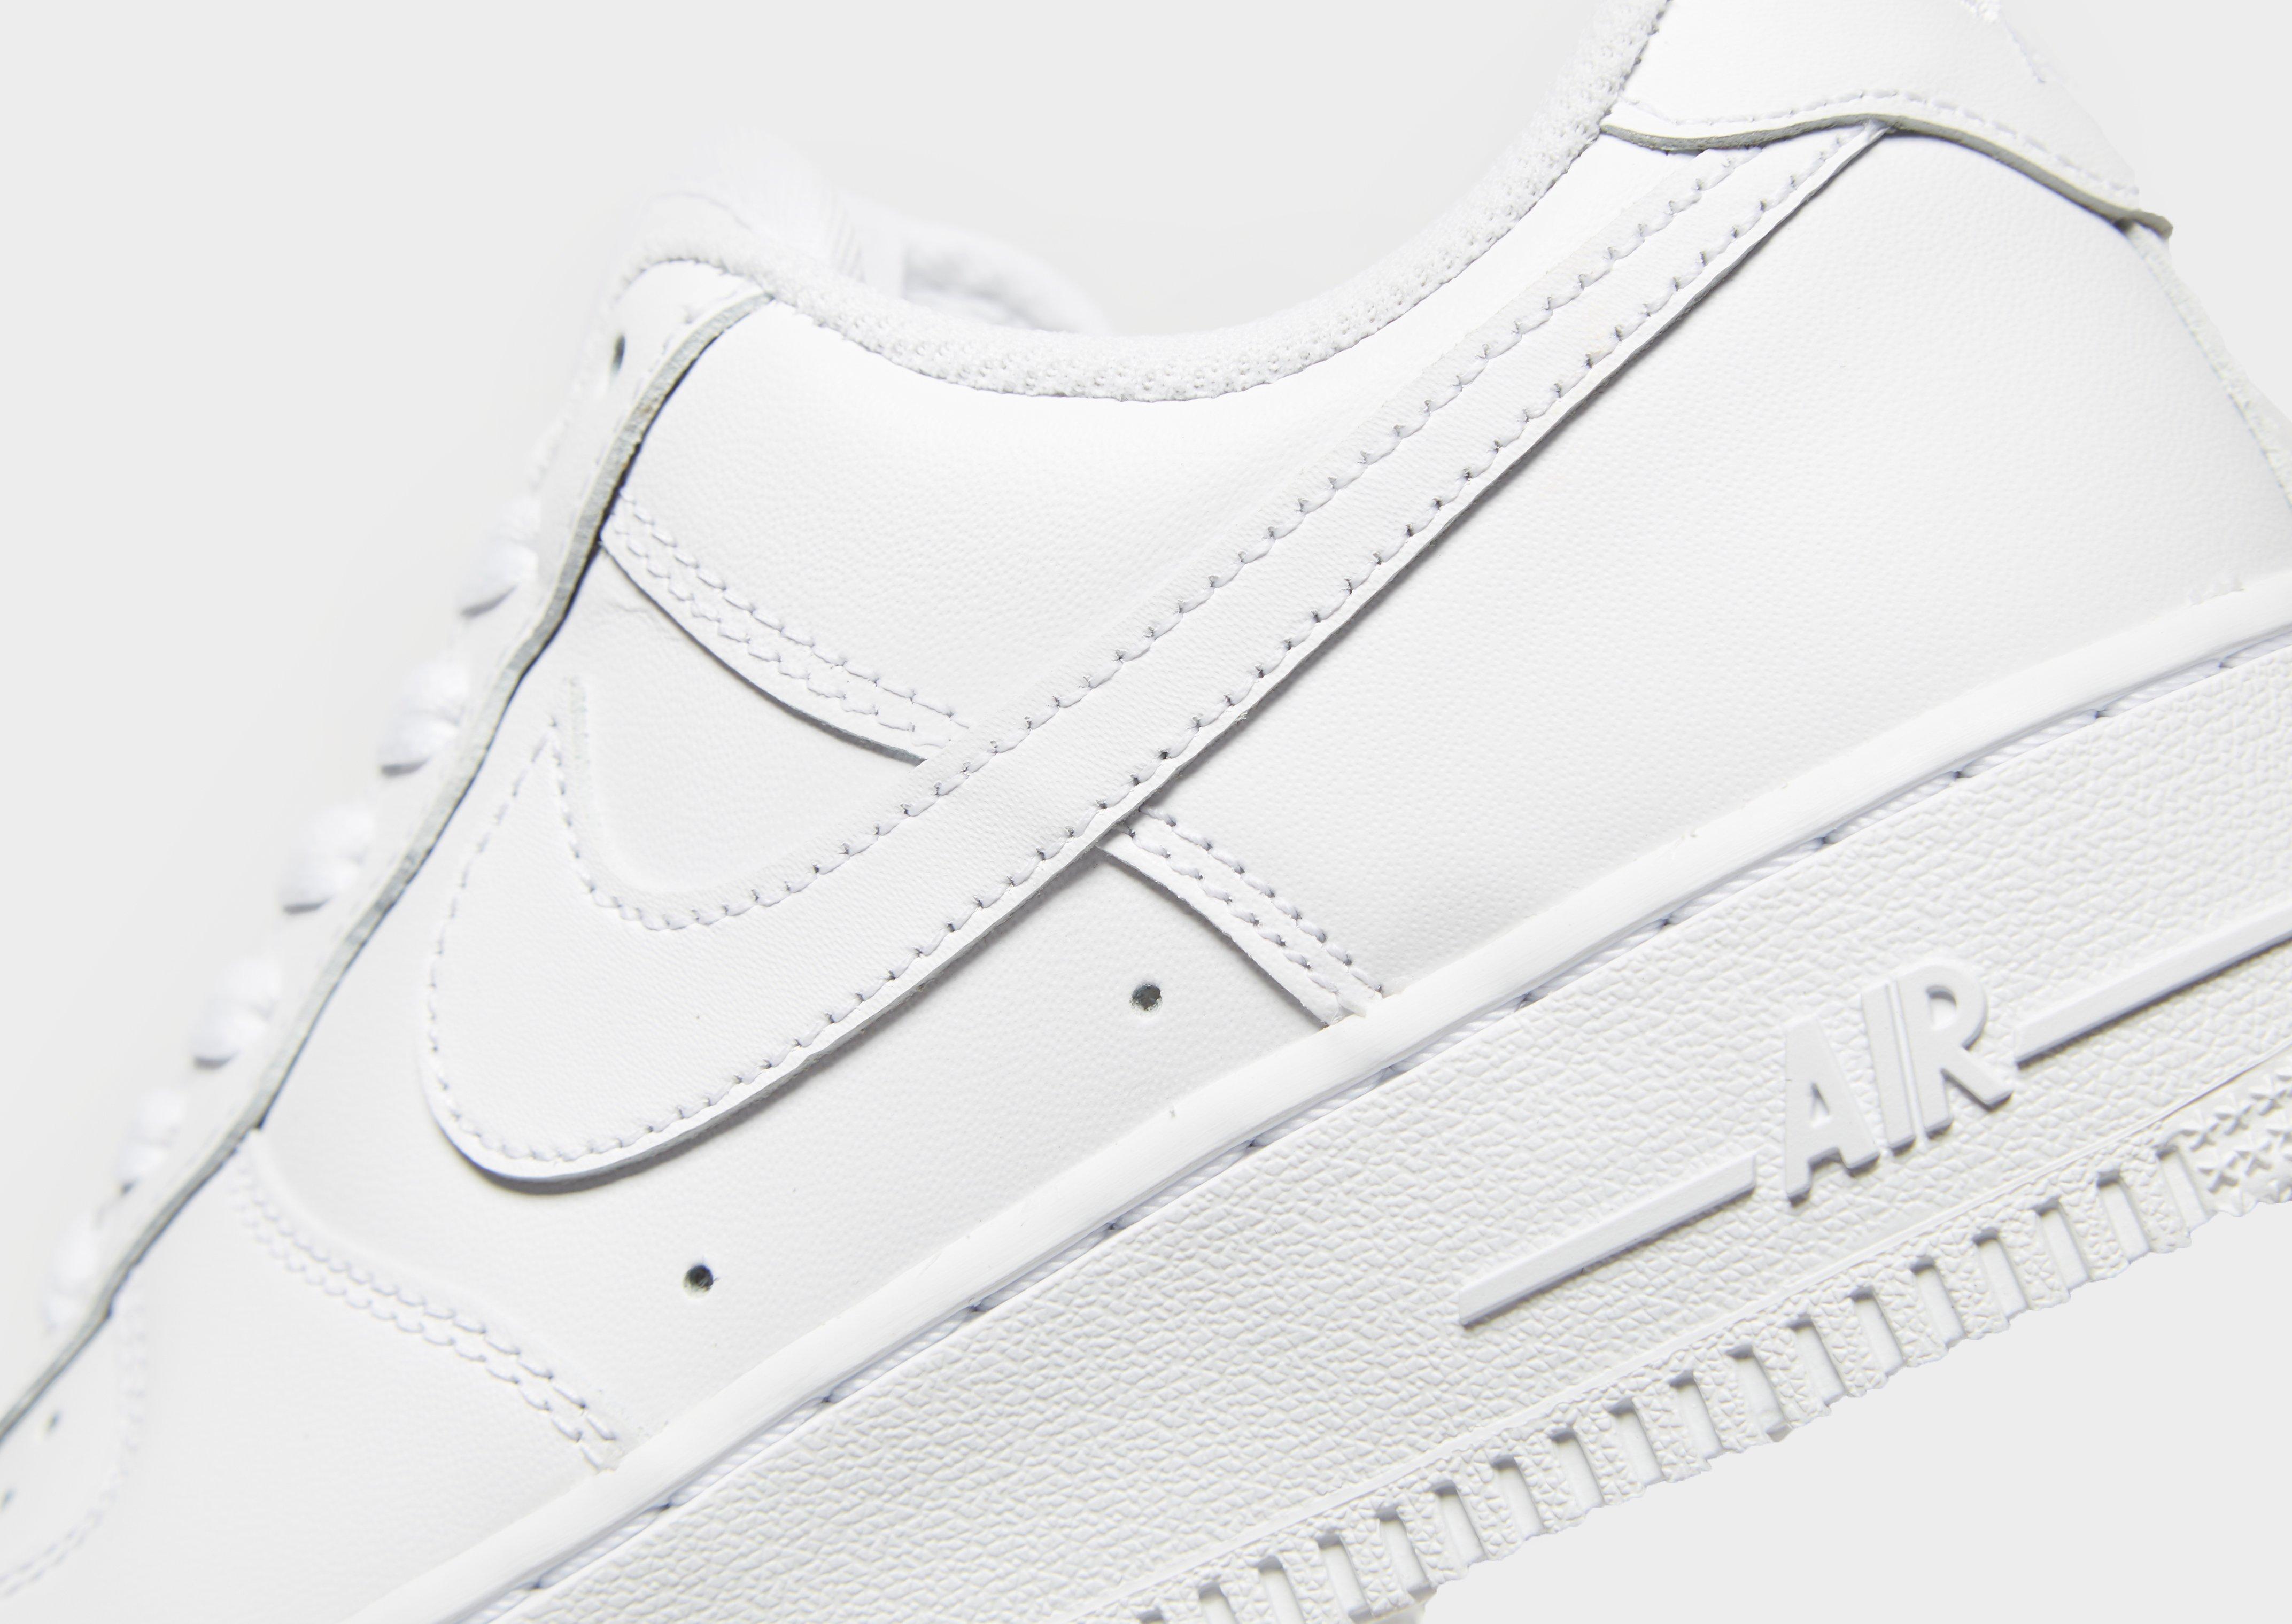 nike airforce 1 low womens